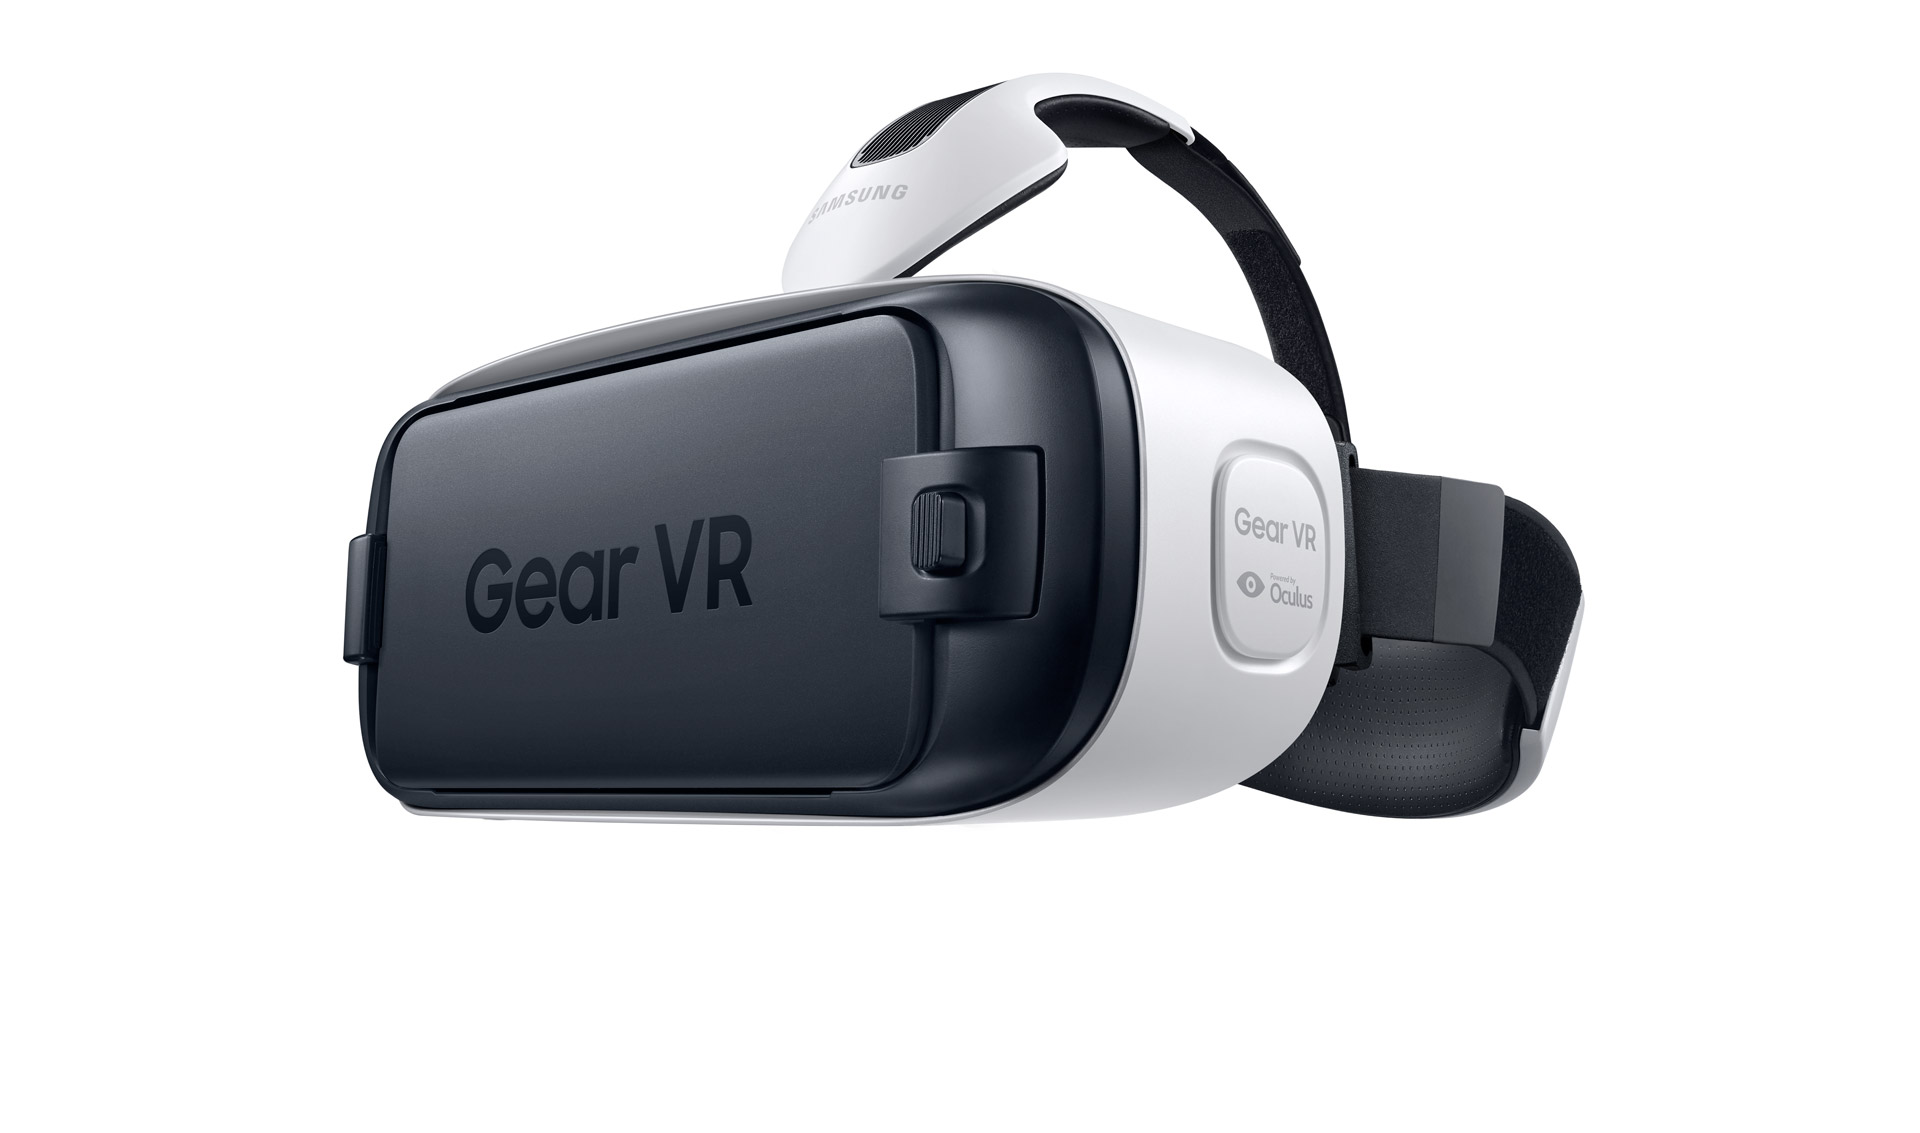 new-gear-vr-for-galaxy-s6-and-s6-edge-goes-on-sale-may-8th-in-u-s-pre